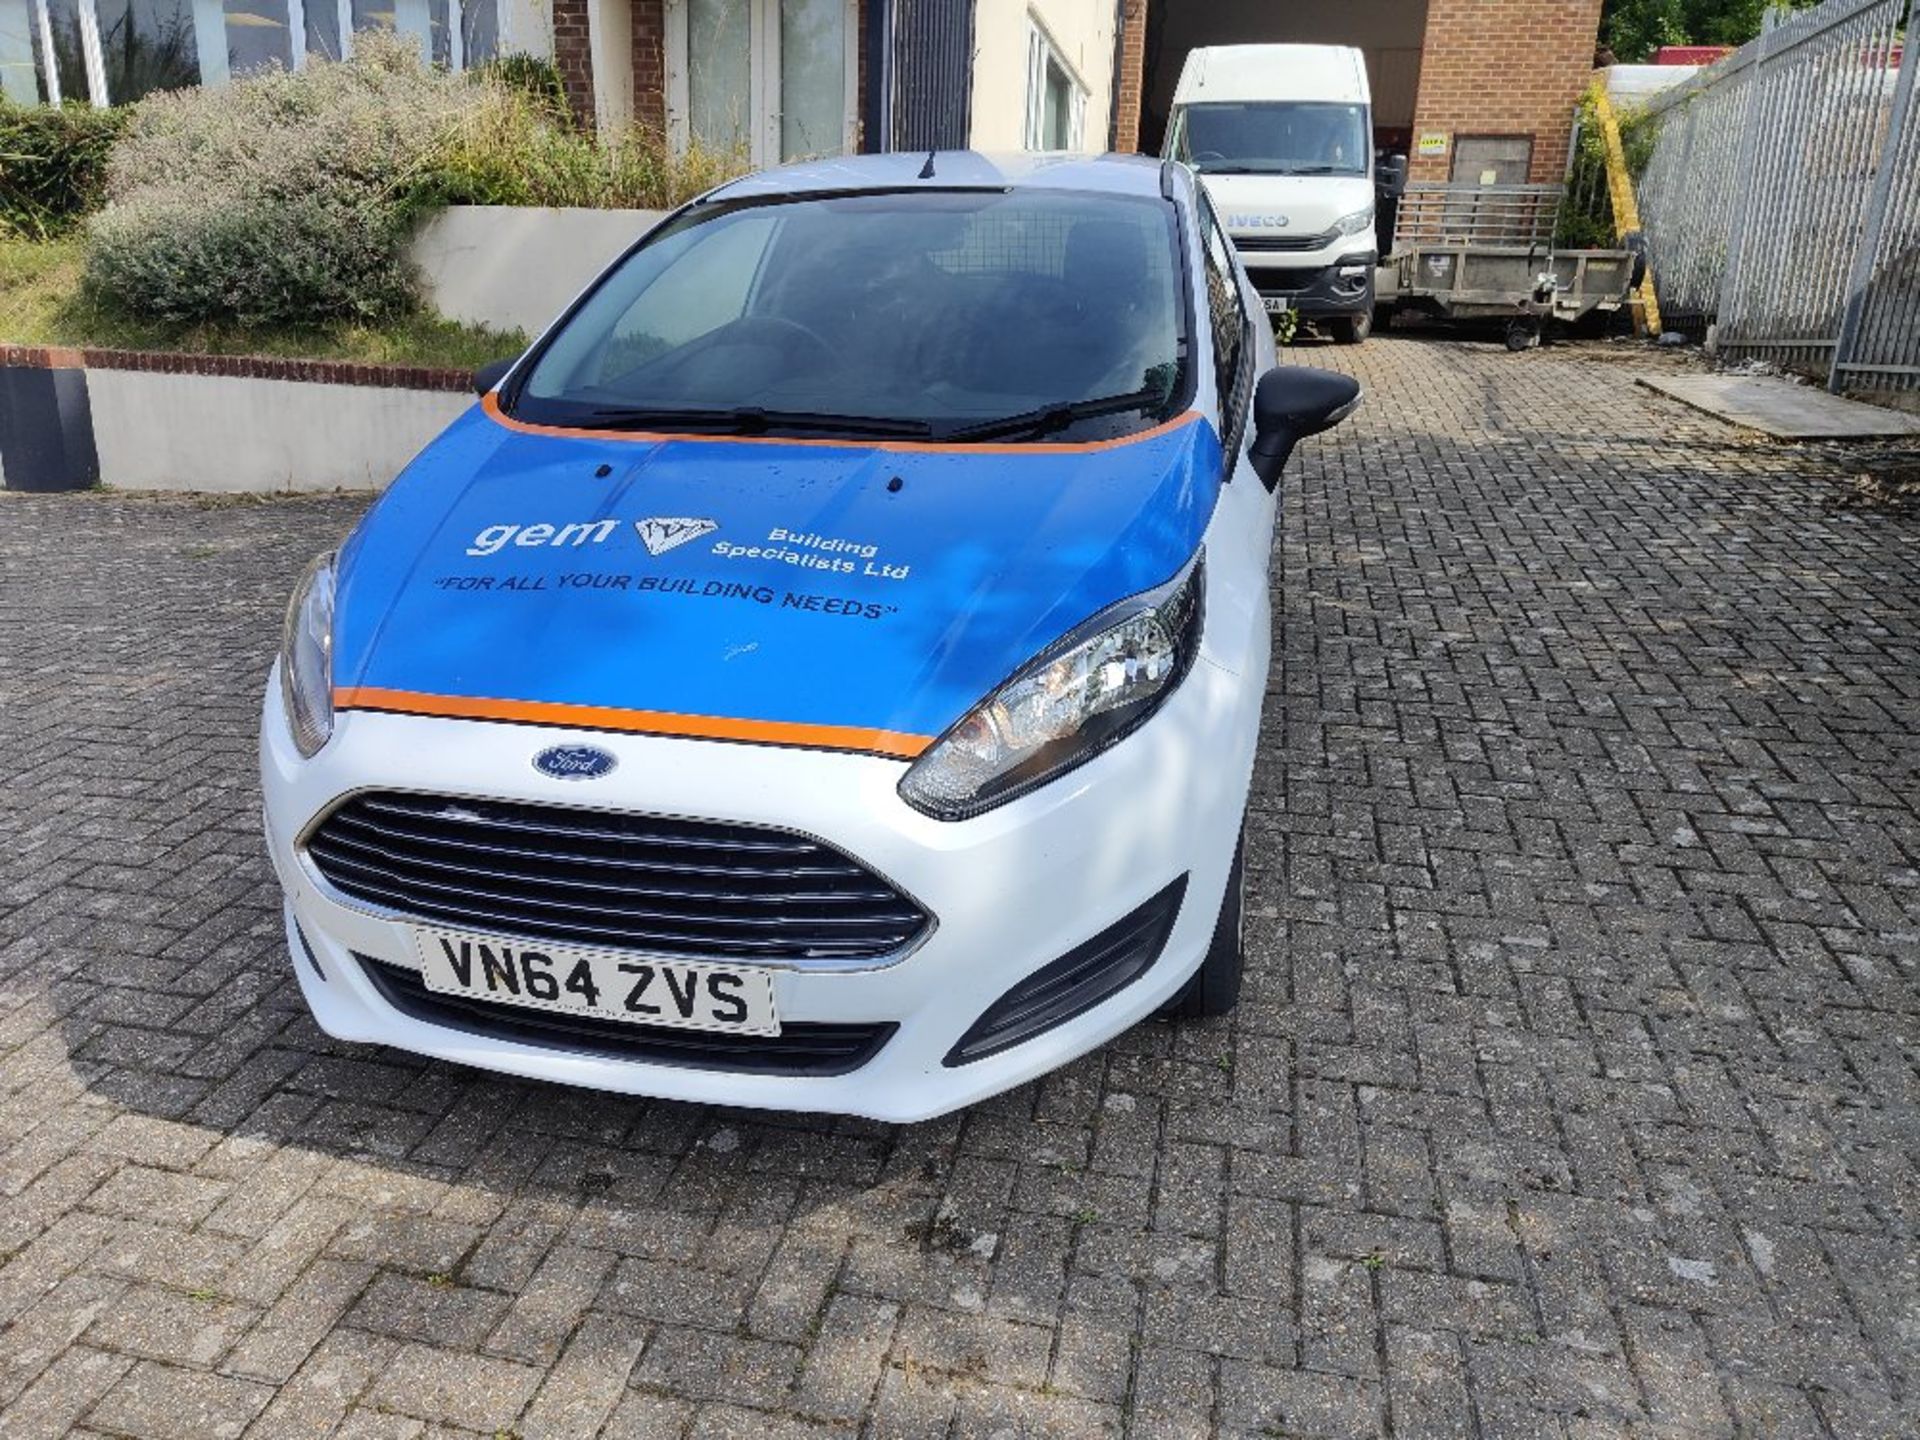 VN64 ZVS - Ford Fiesta BASE TDCI - Image 13 of 18